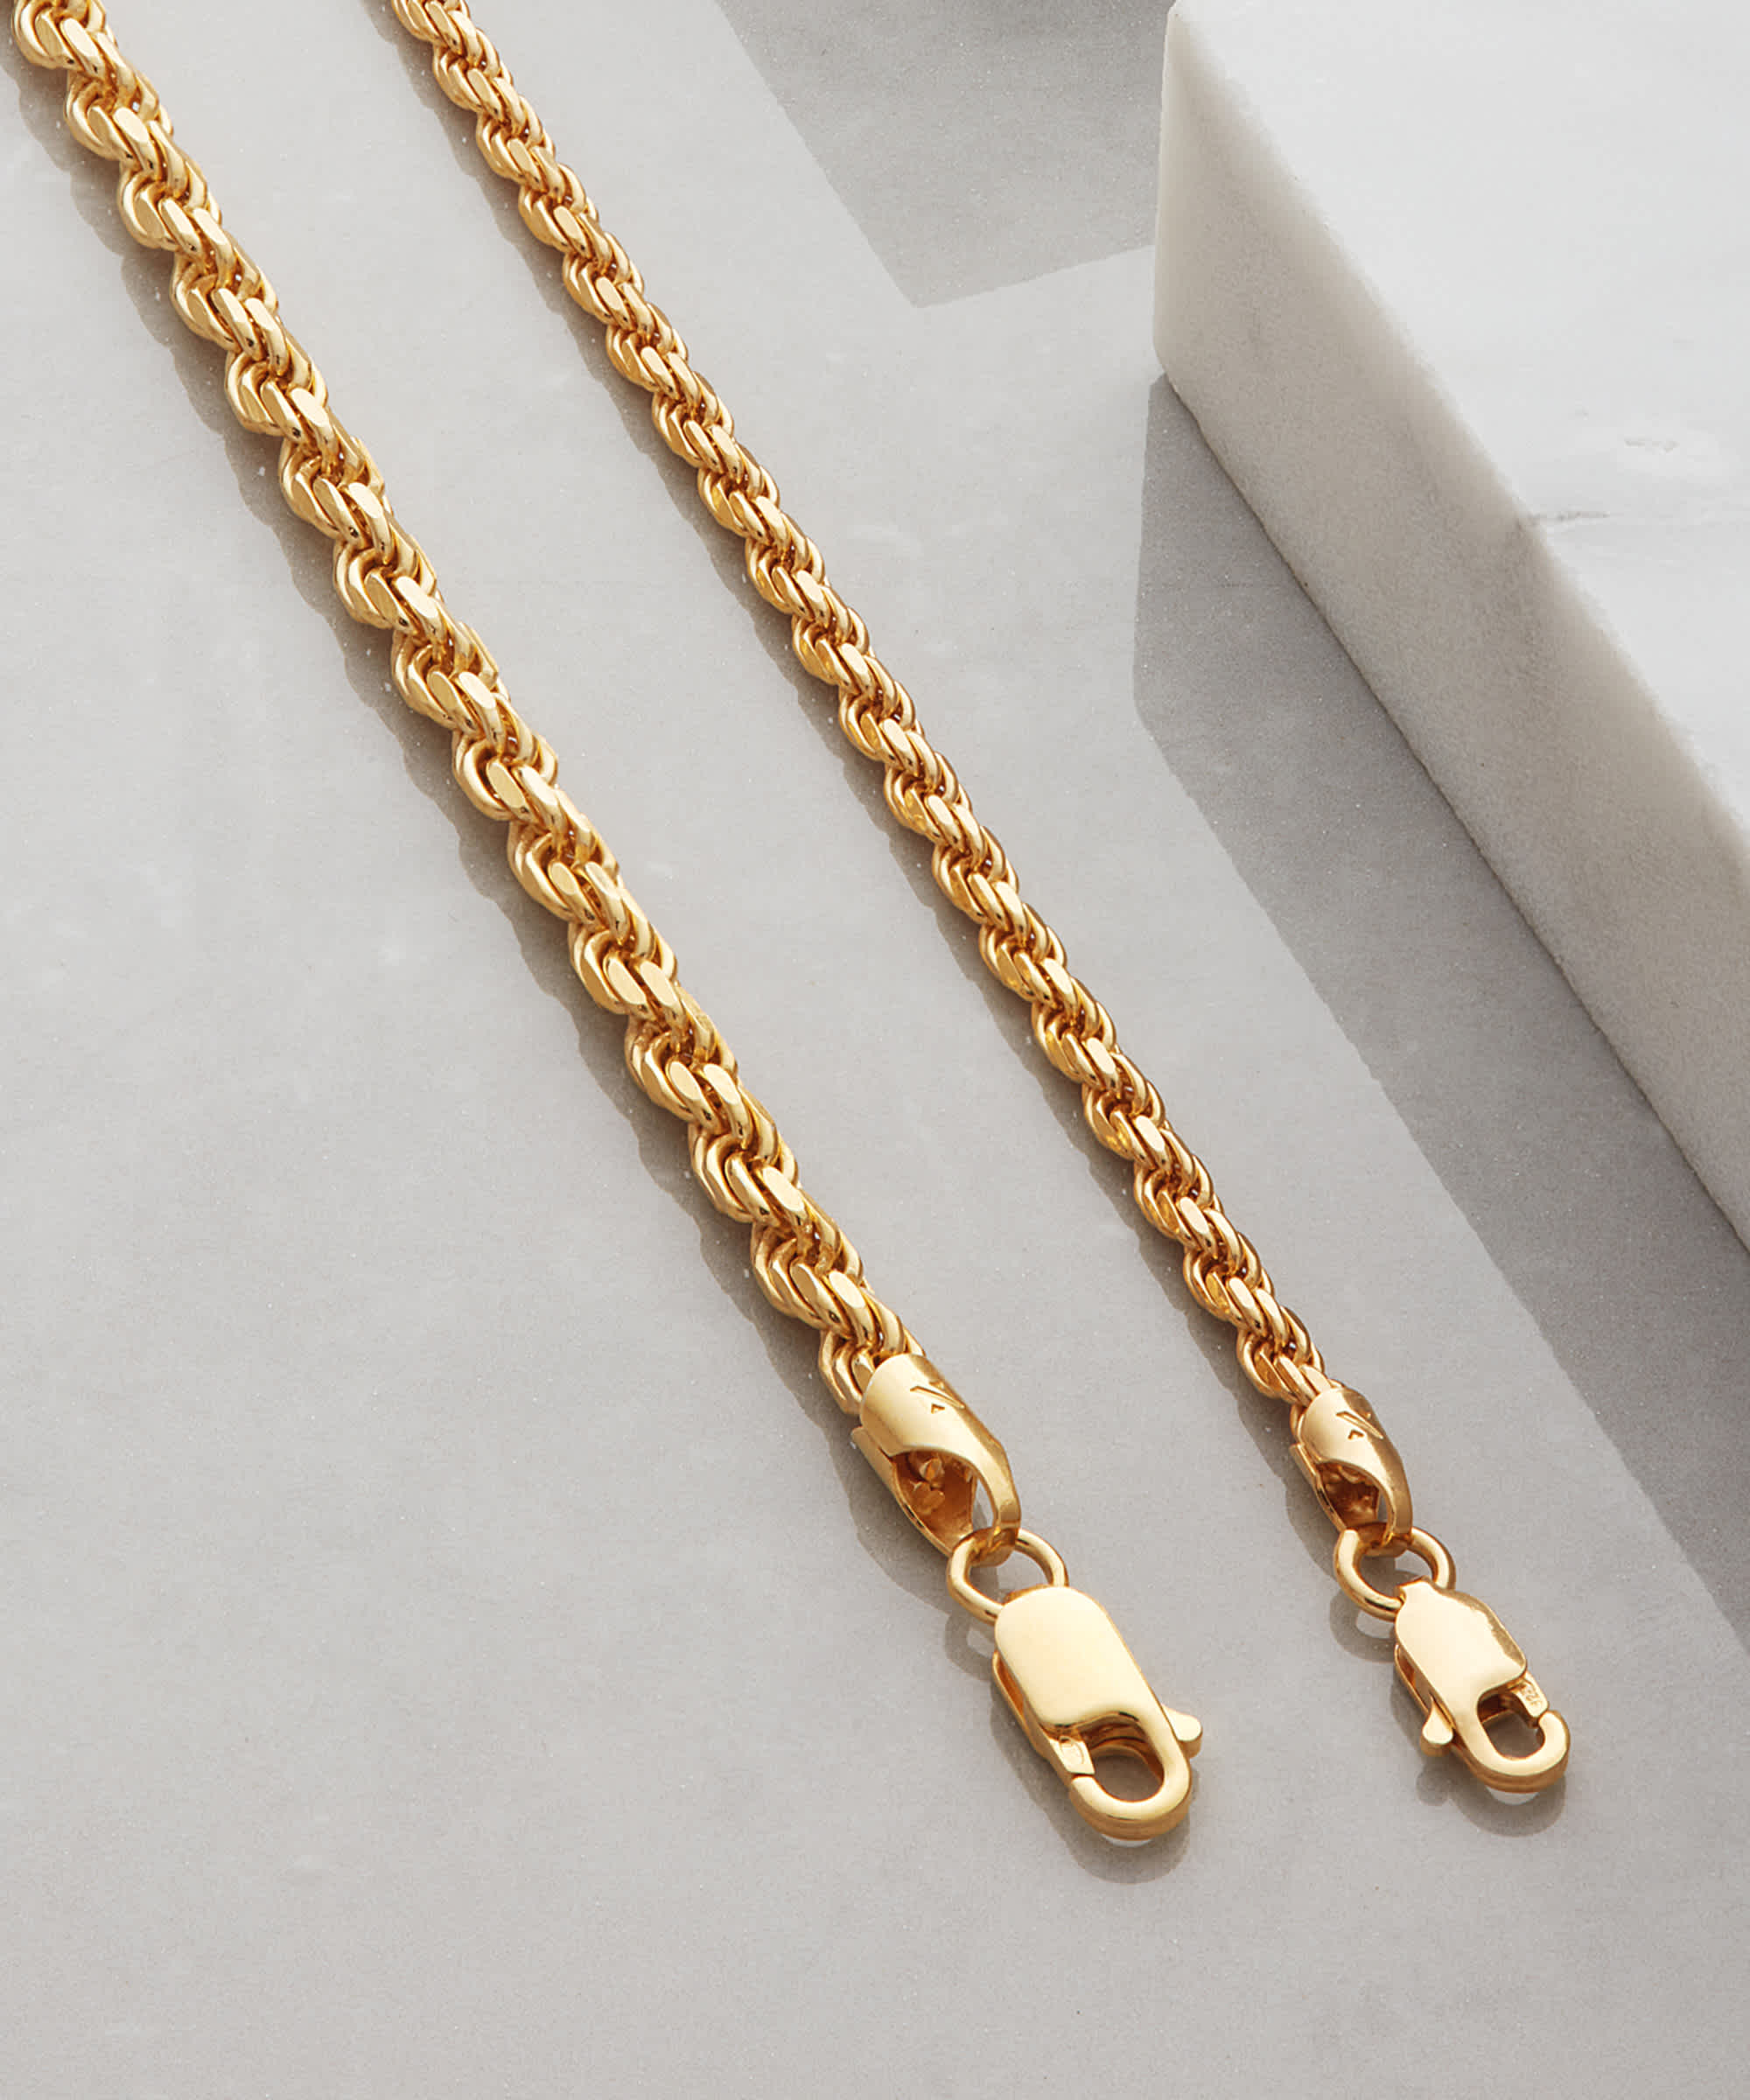 Italian Made - Rope Chain Gold Bonded